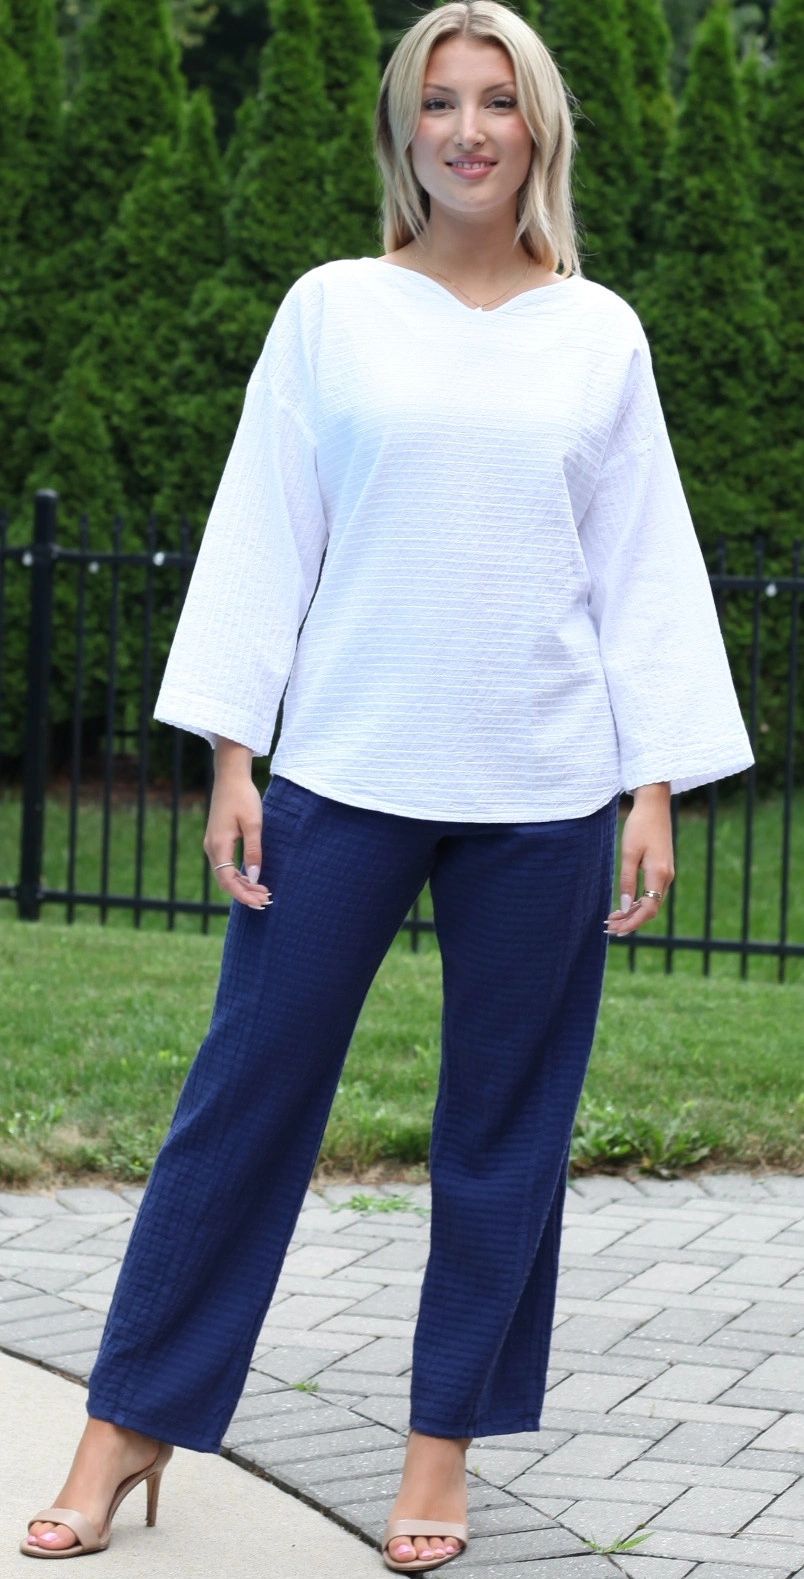 #501-Hazel Top
Sizes S-XL
Plus: 1X-3X
AVAILABLE IN ALL COLORS#506- Alba Pants- SHOWN IN HARBOR NAVY
